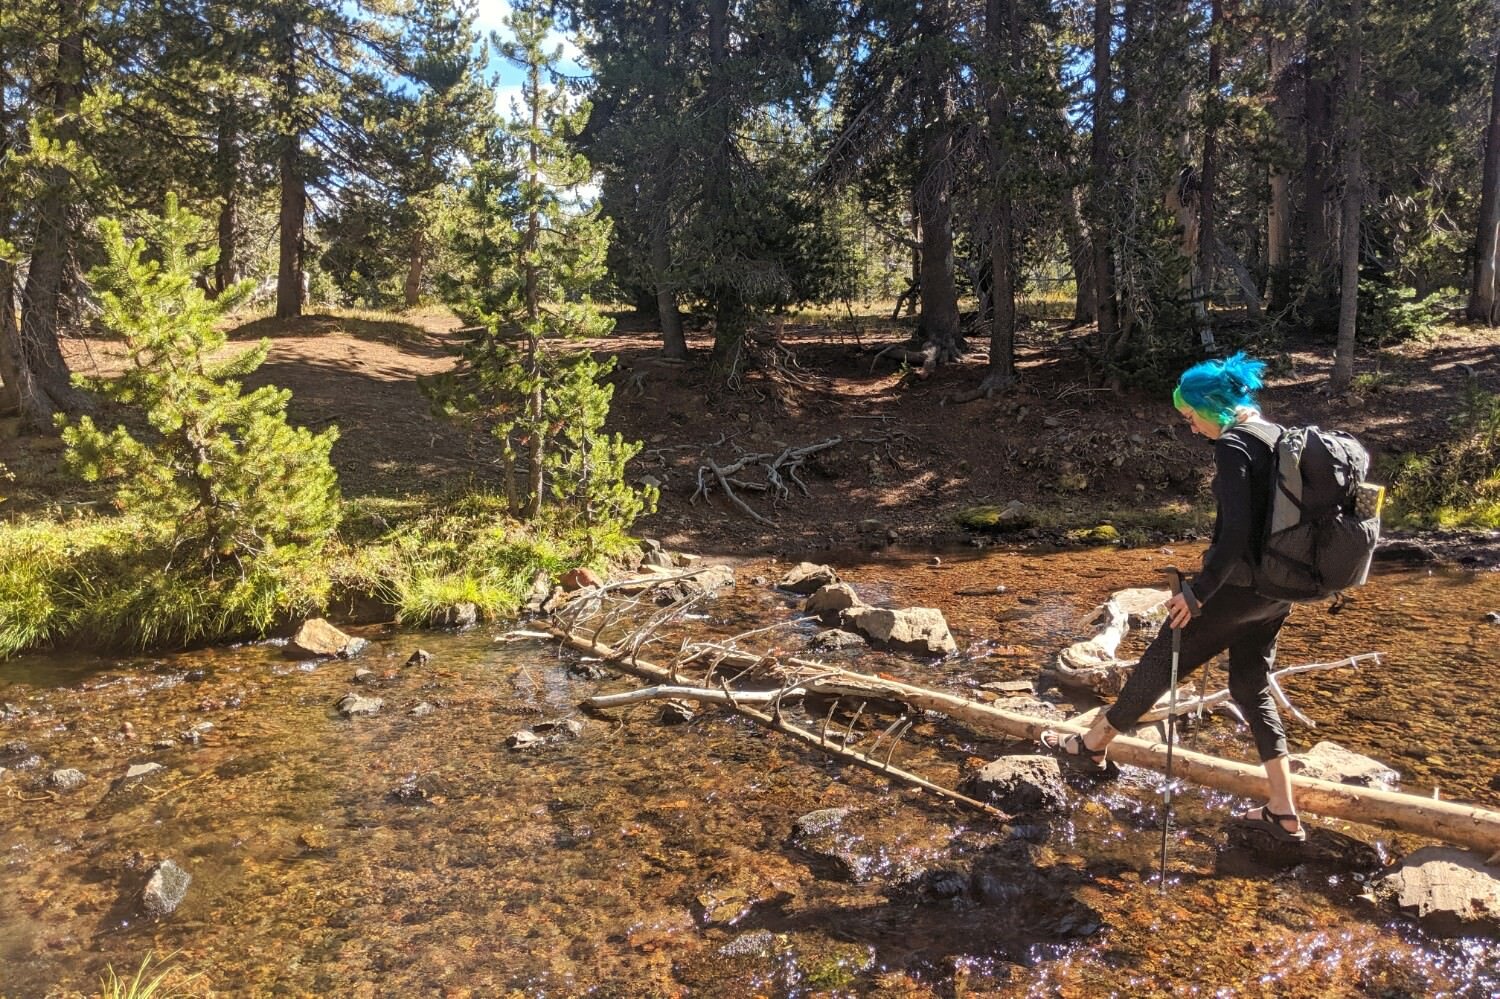 Water crossings are so much easier with sandals, but it’s still a good idea to carry a pack towel to wipe away excess moisture once you get to the other side.